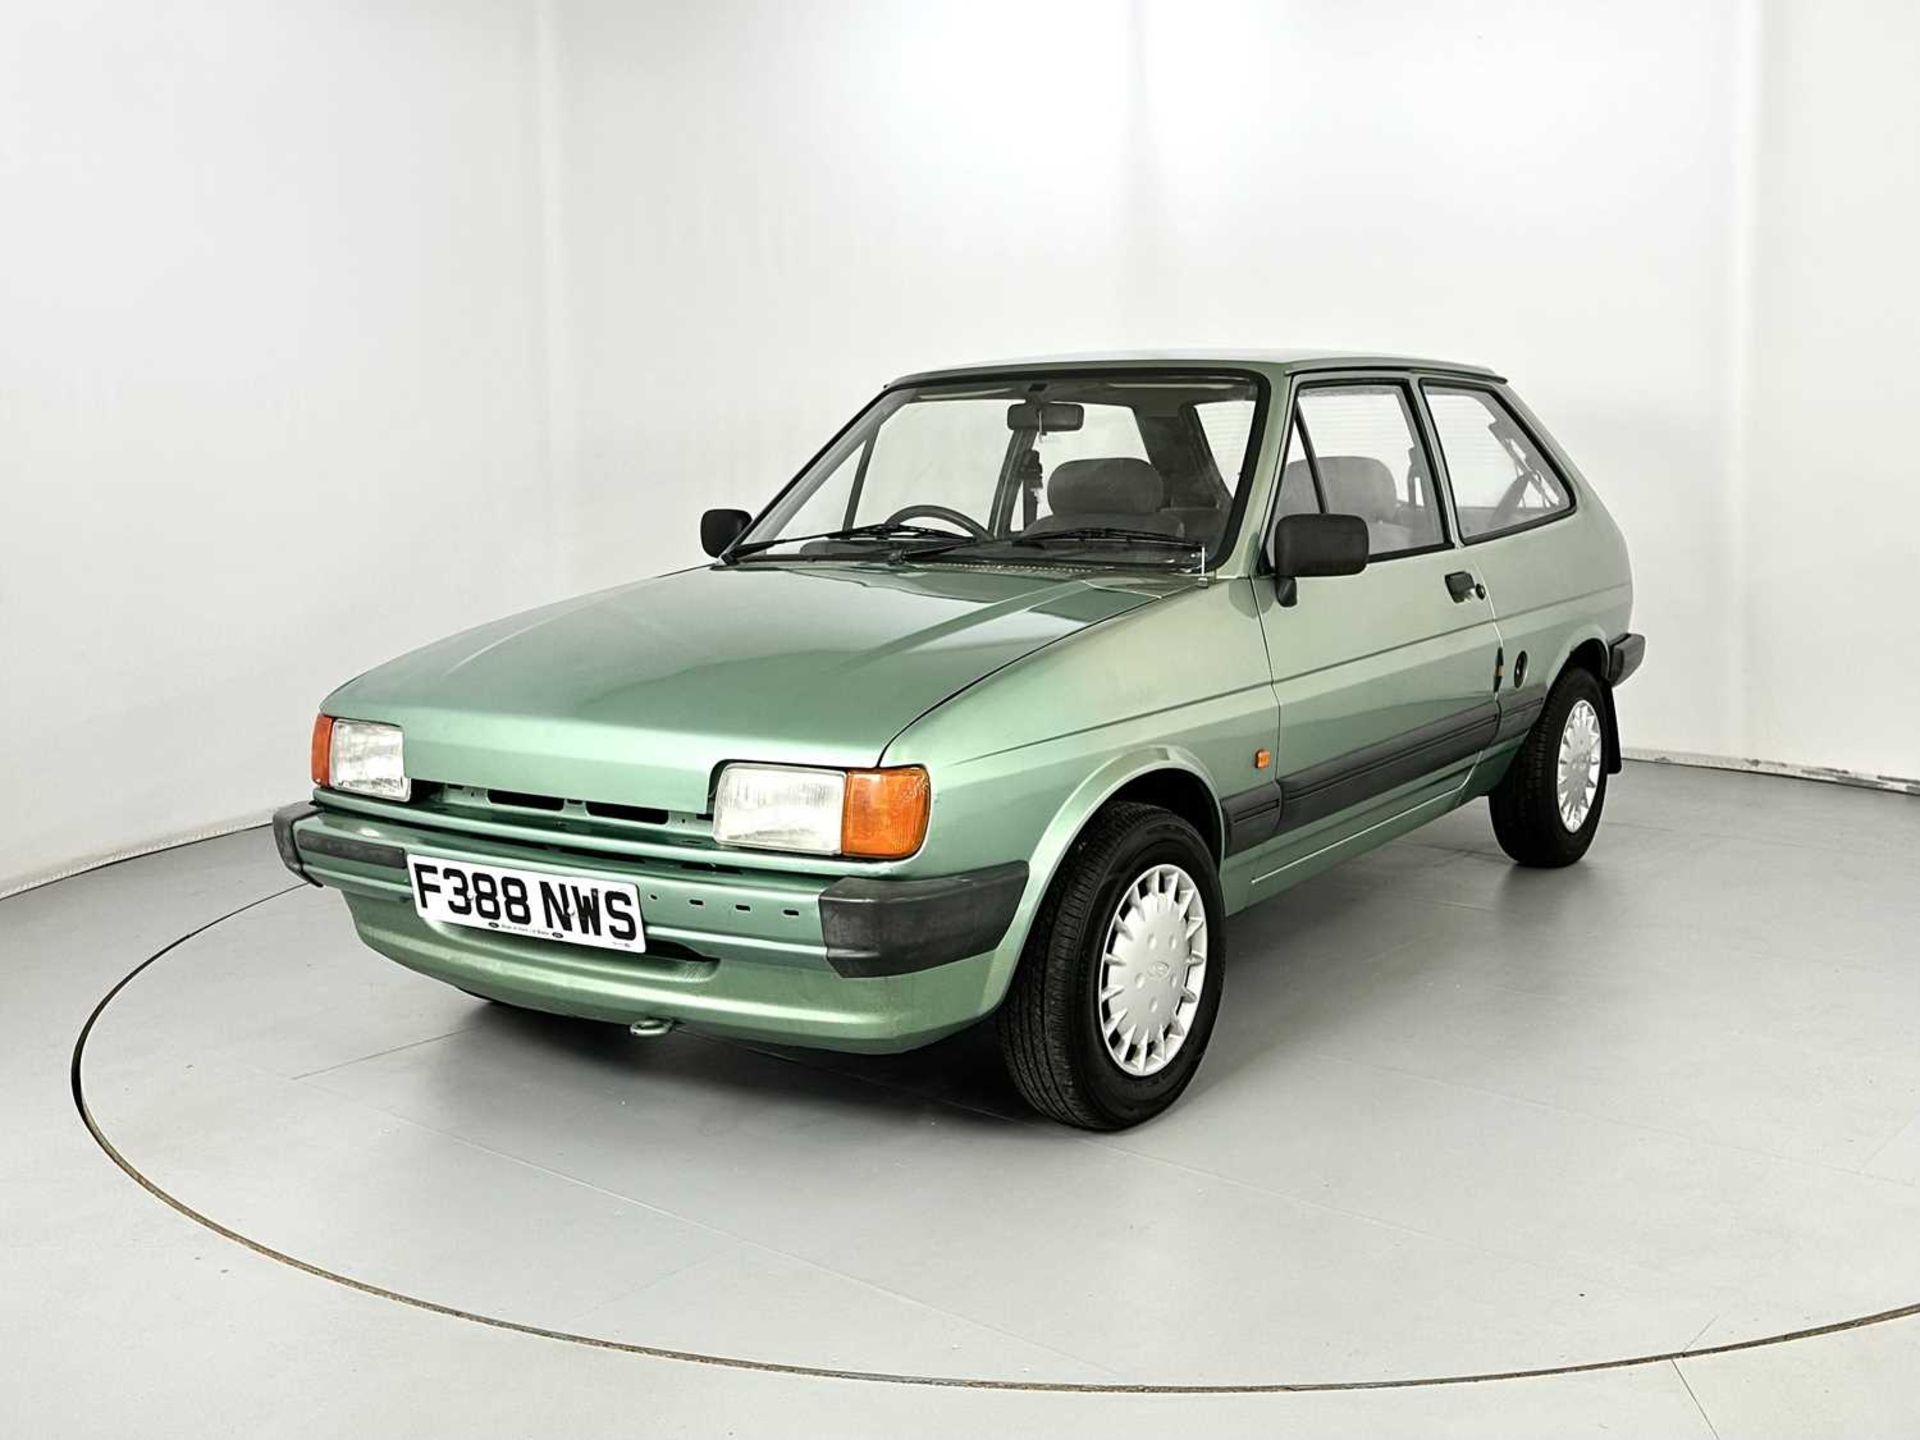 1988 Ford Fiesta - Image 3 of 30